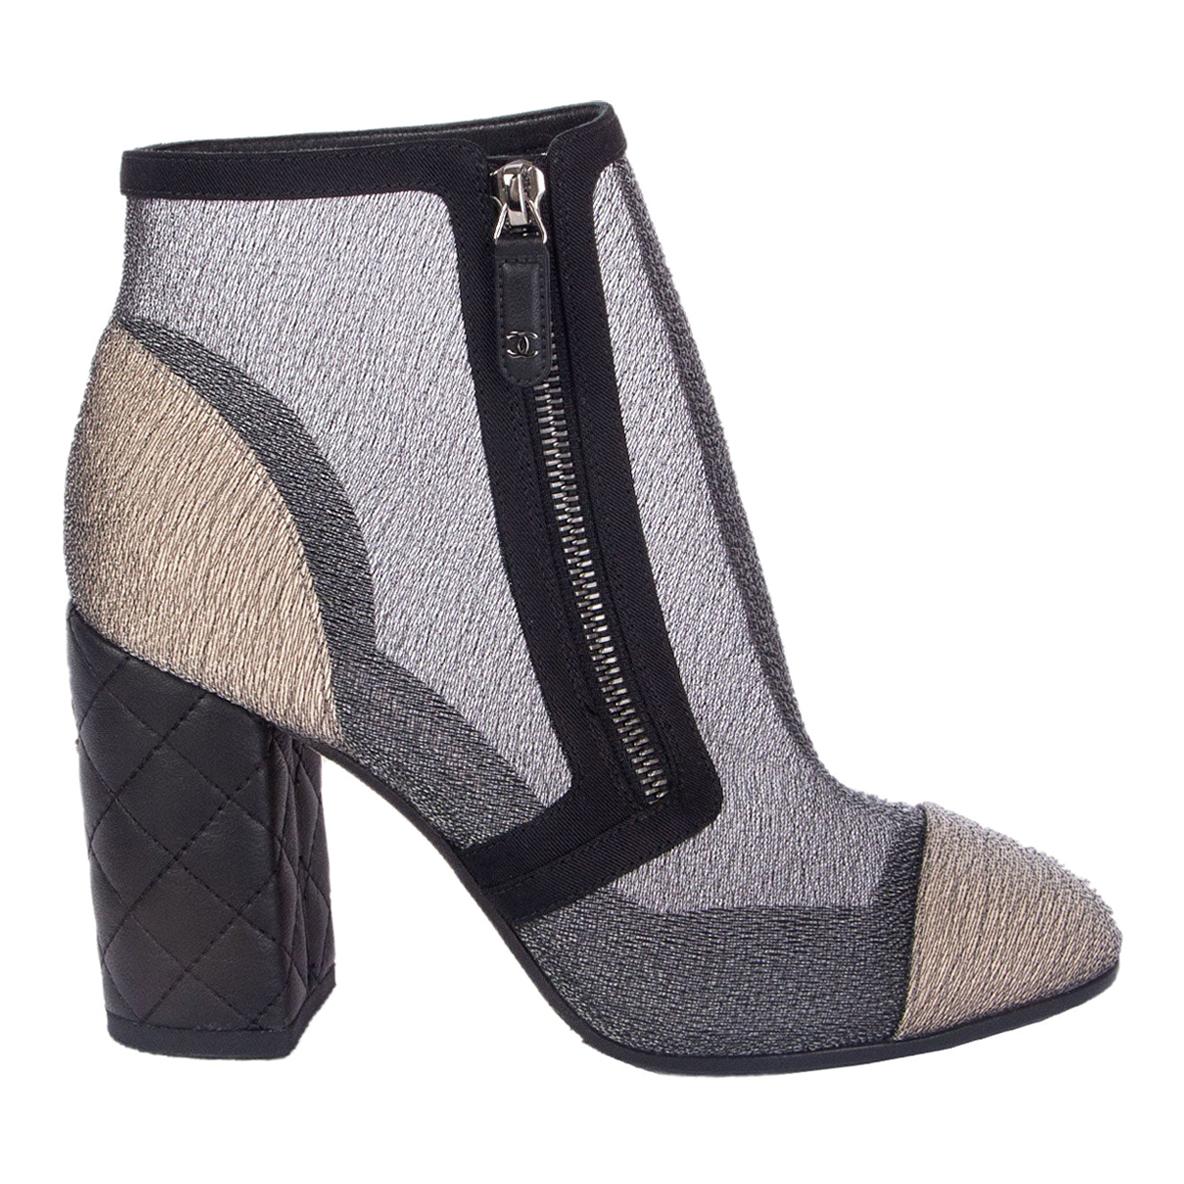 CHANEL grey meash & gold BLOCK HEEL ANKLE Boots Shoes 38.5